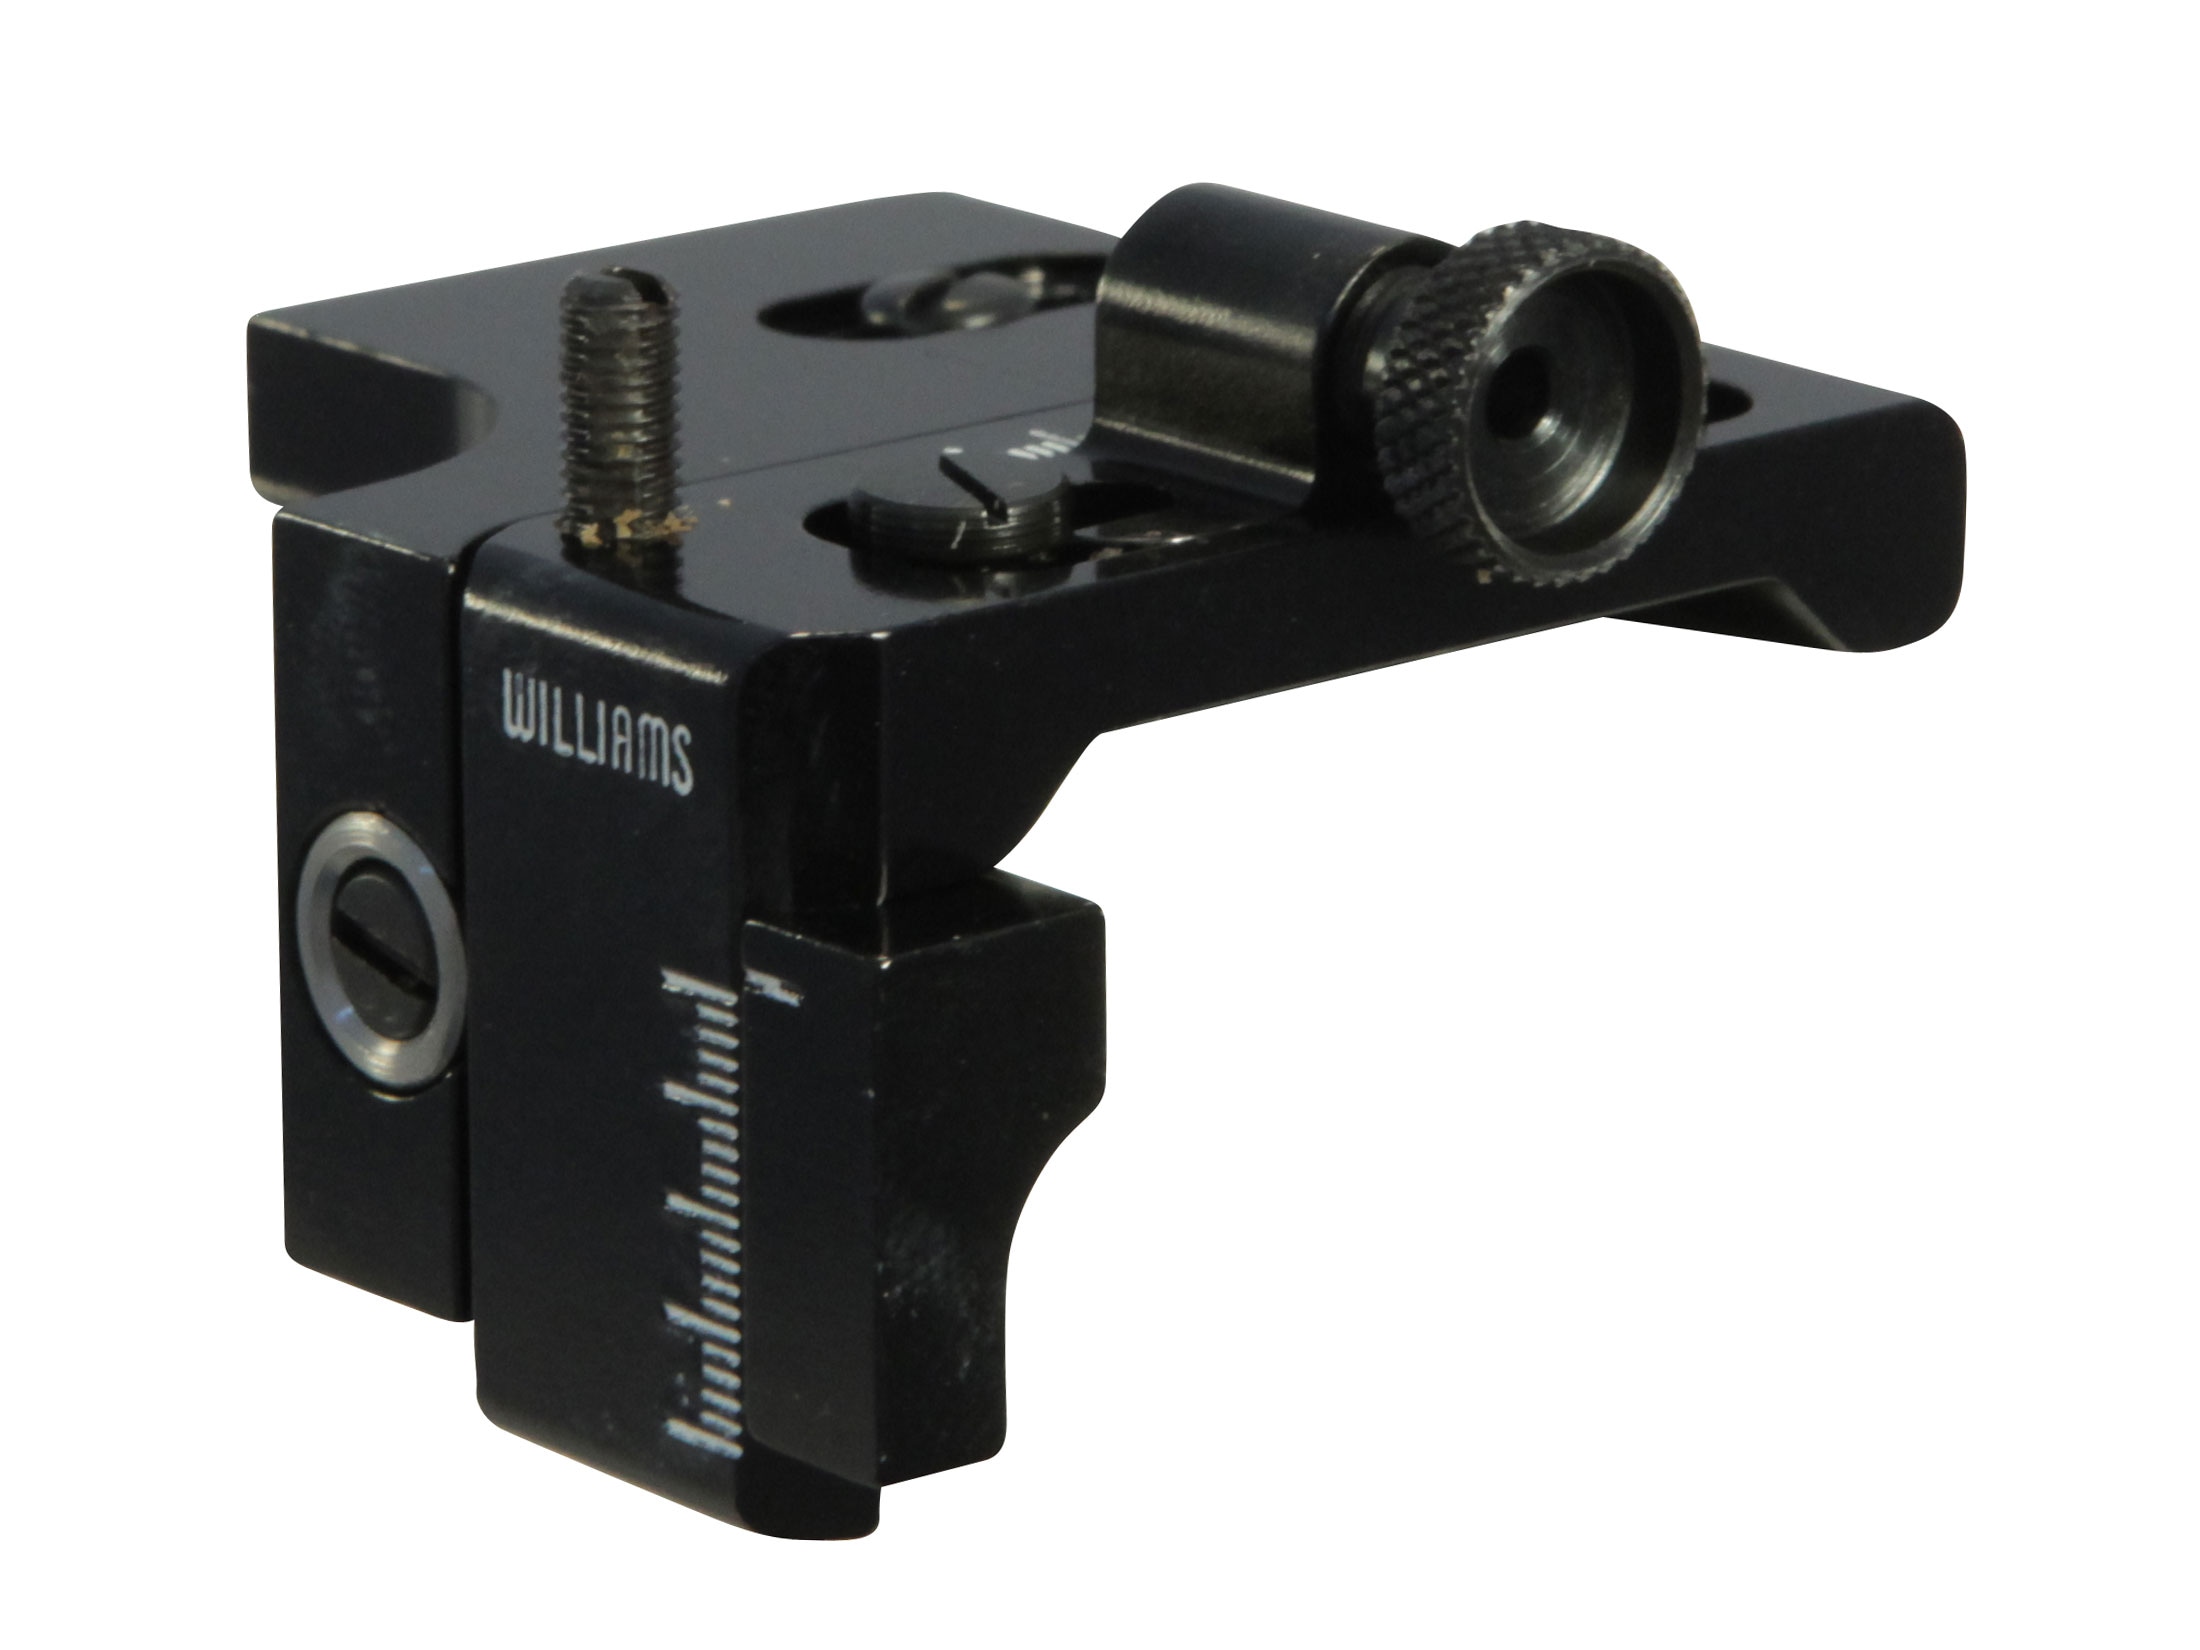 Williams Diopter Rear Sight for 11mm Dovetails 5D-AG 70809 